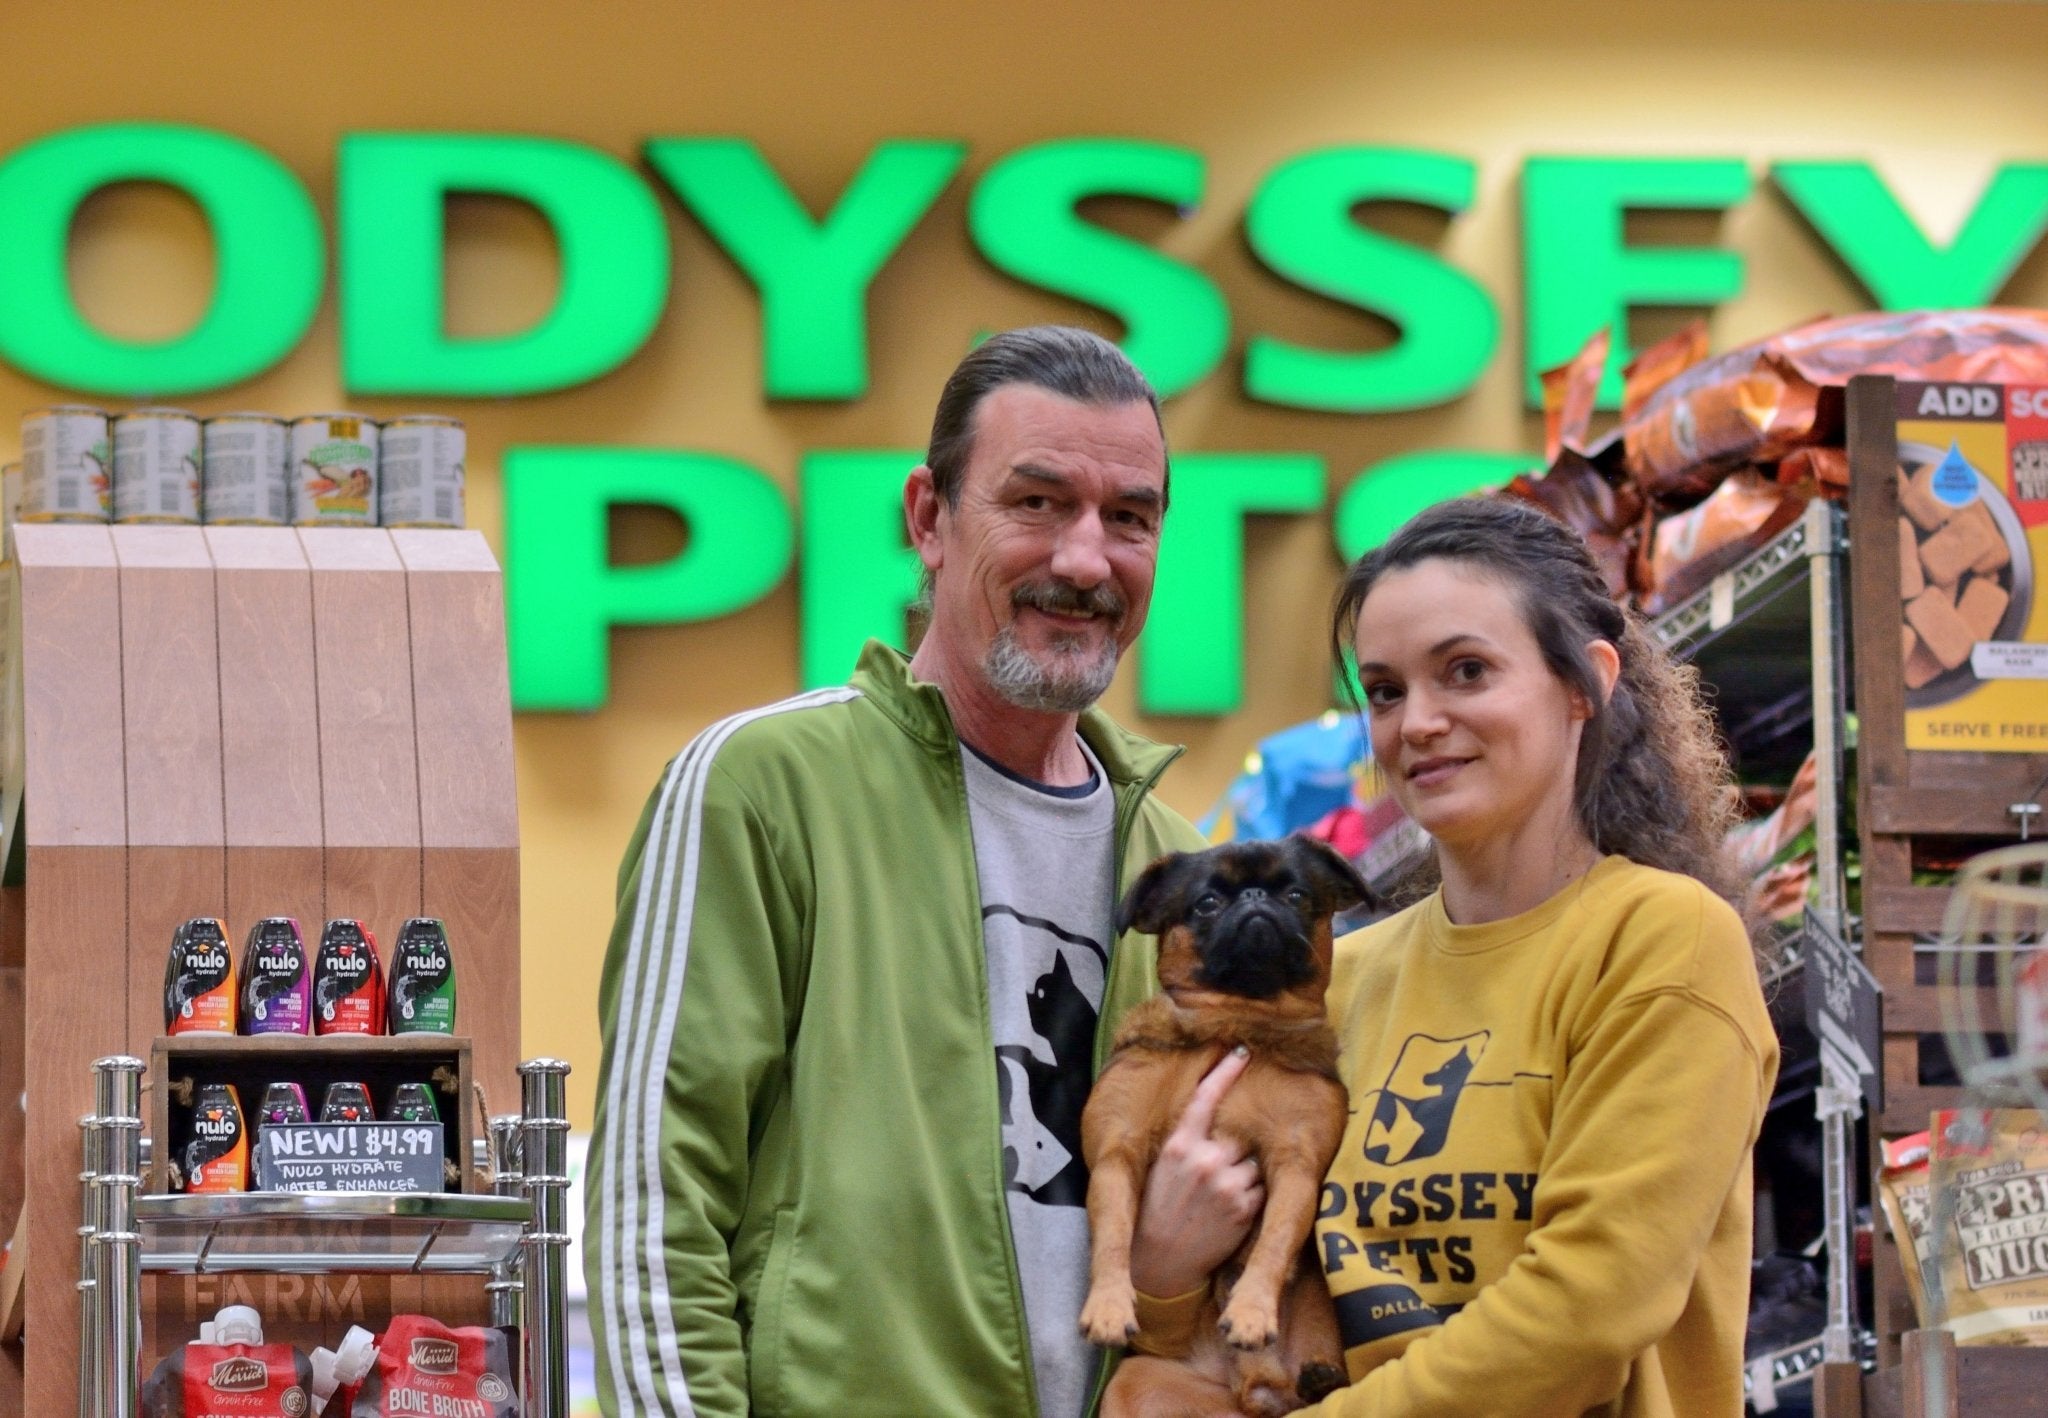 Meet Our FURiends: Odyssey Pets - Farm To Pet